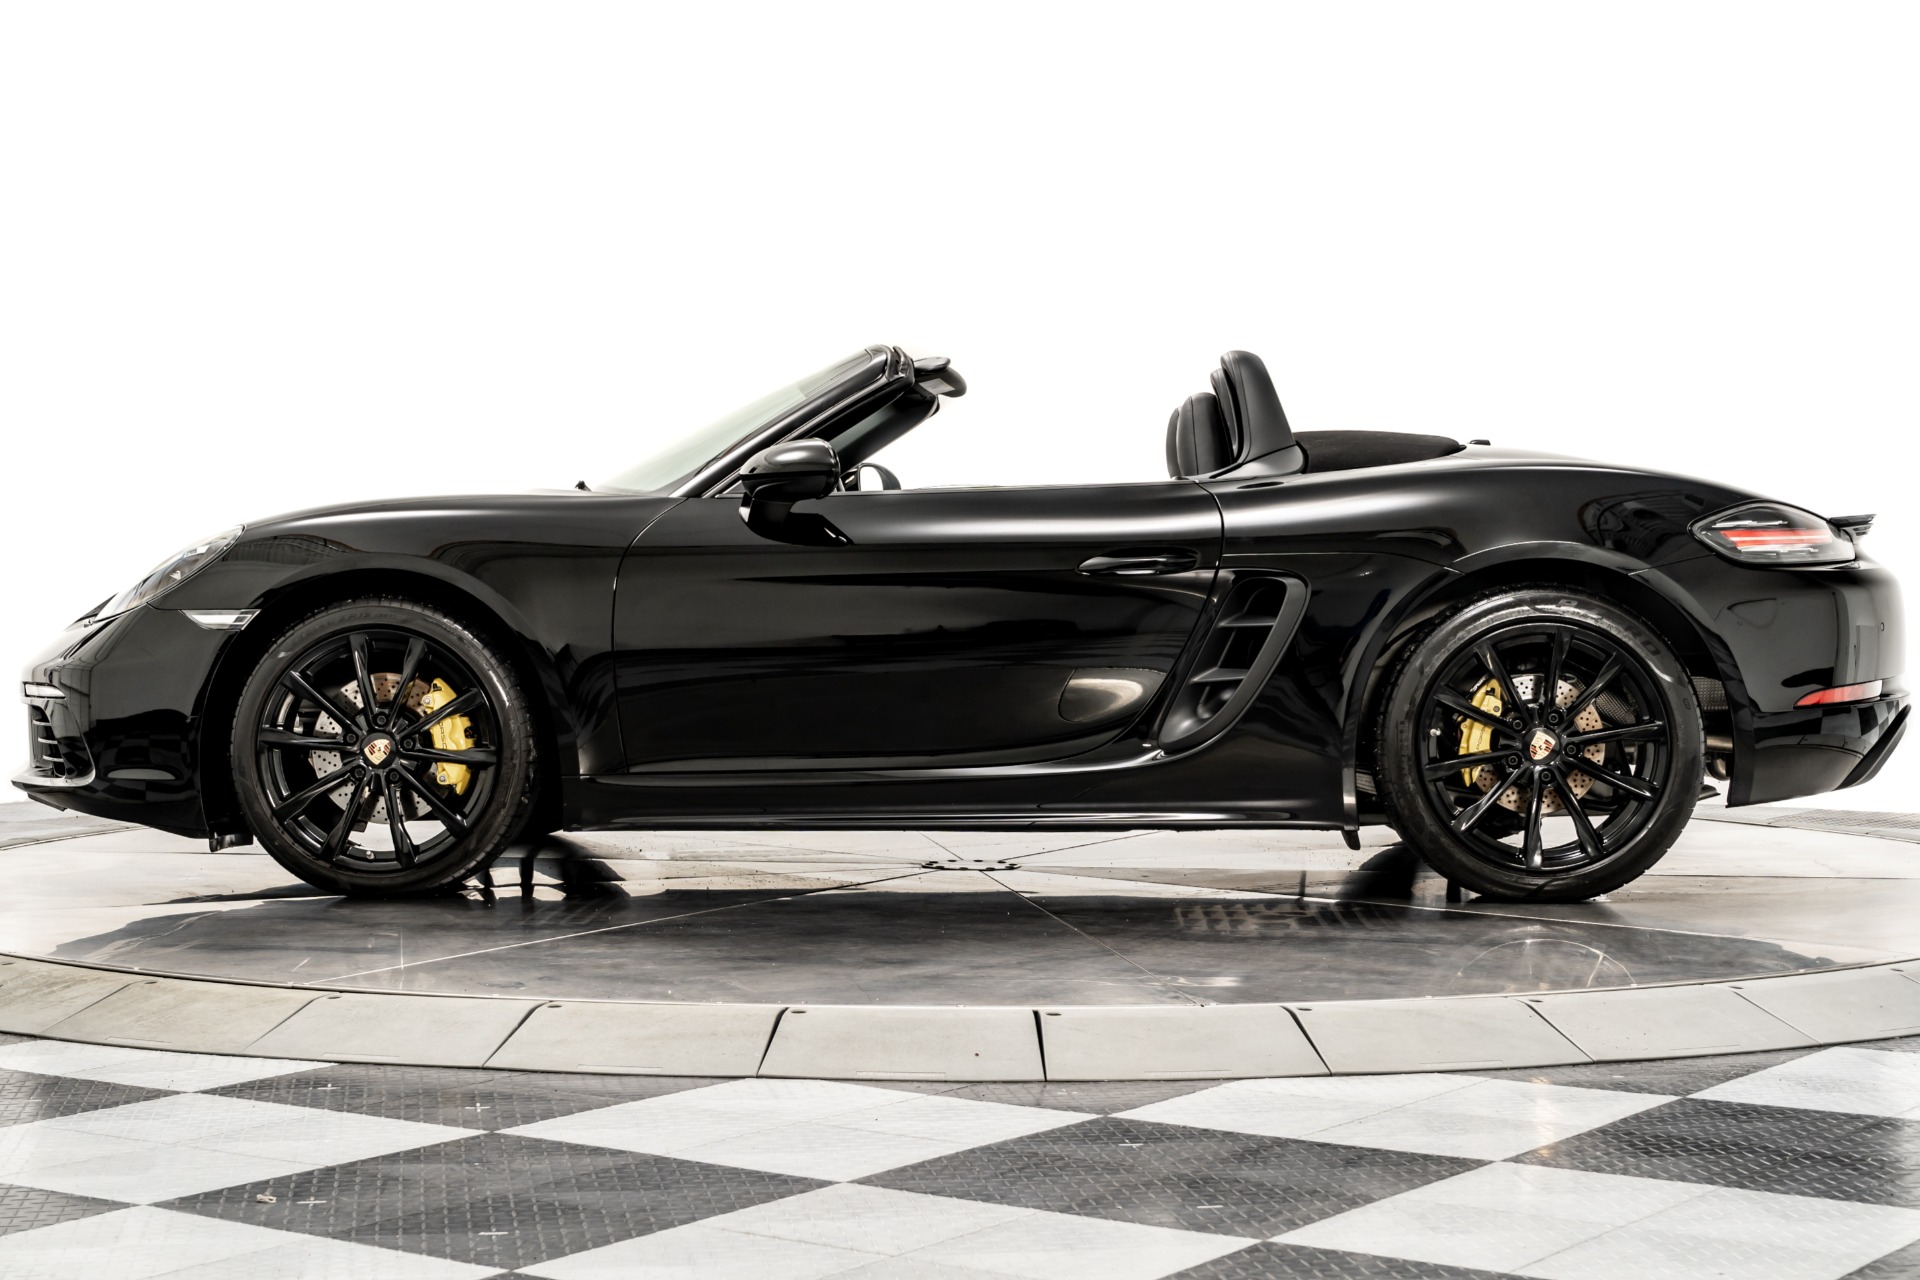 Used 2017 Porsche 718 Boxster For Sale (Sold)